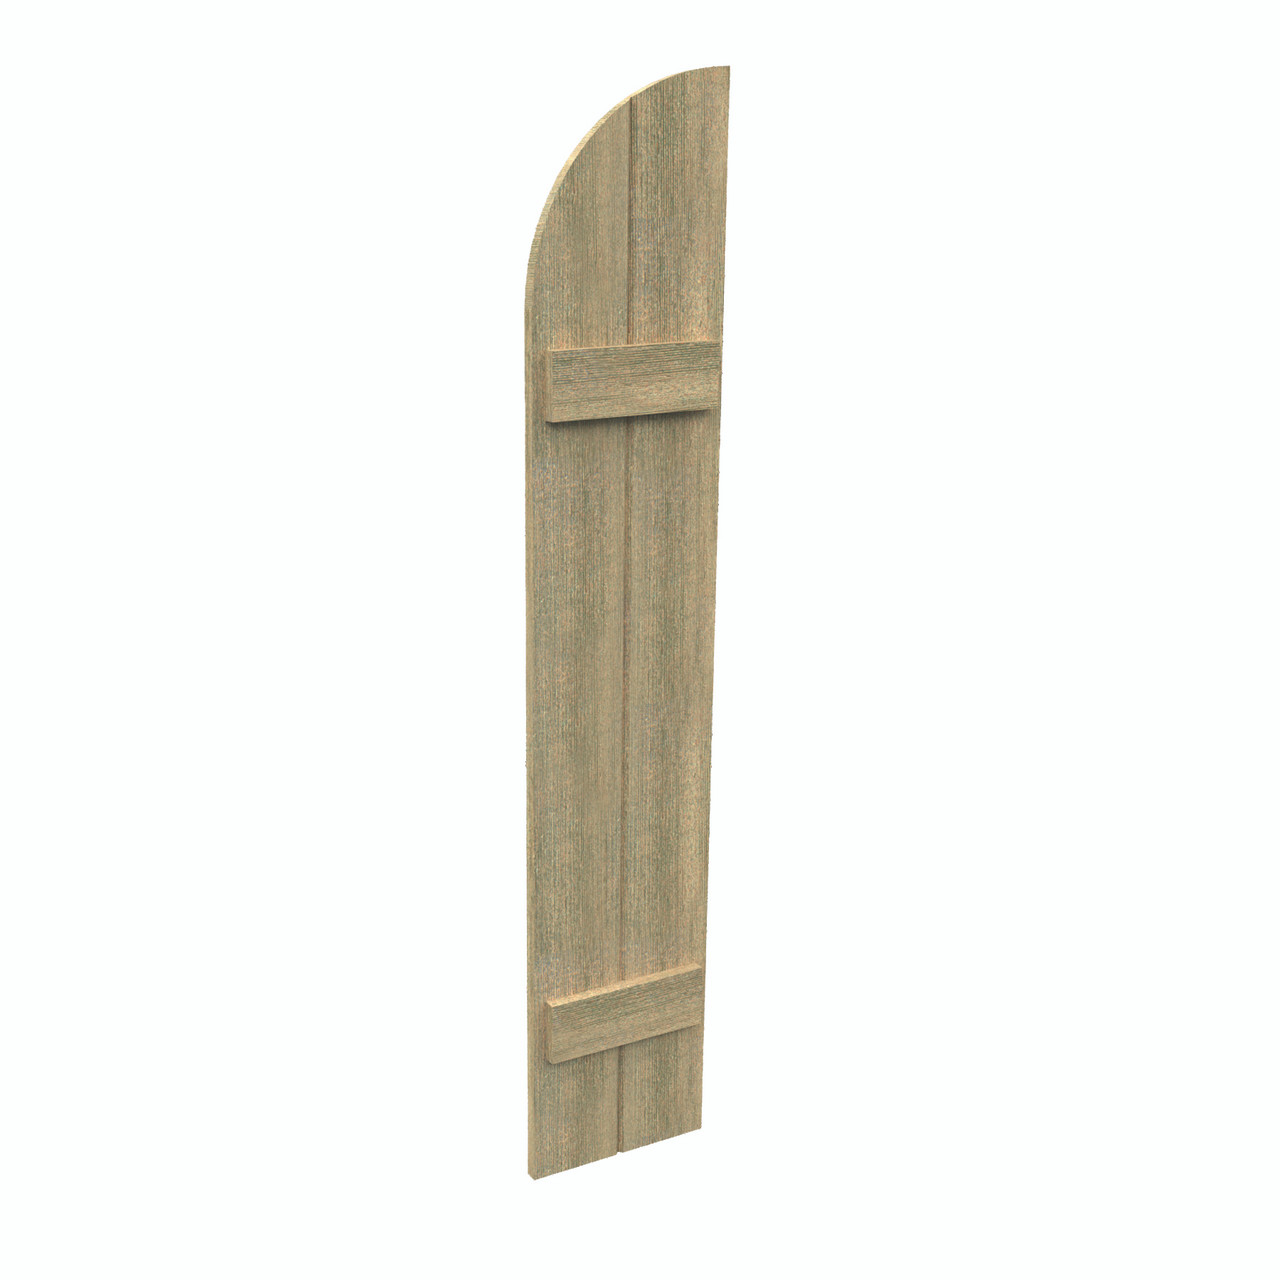 12 inch by 53 inch Quarter Round Shutter with 2-Boards